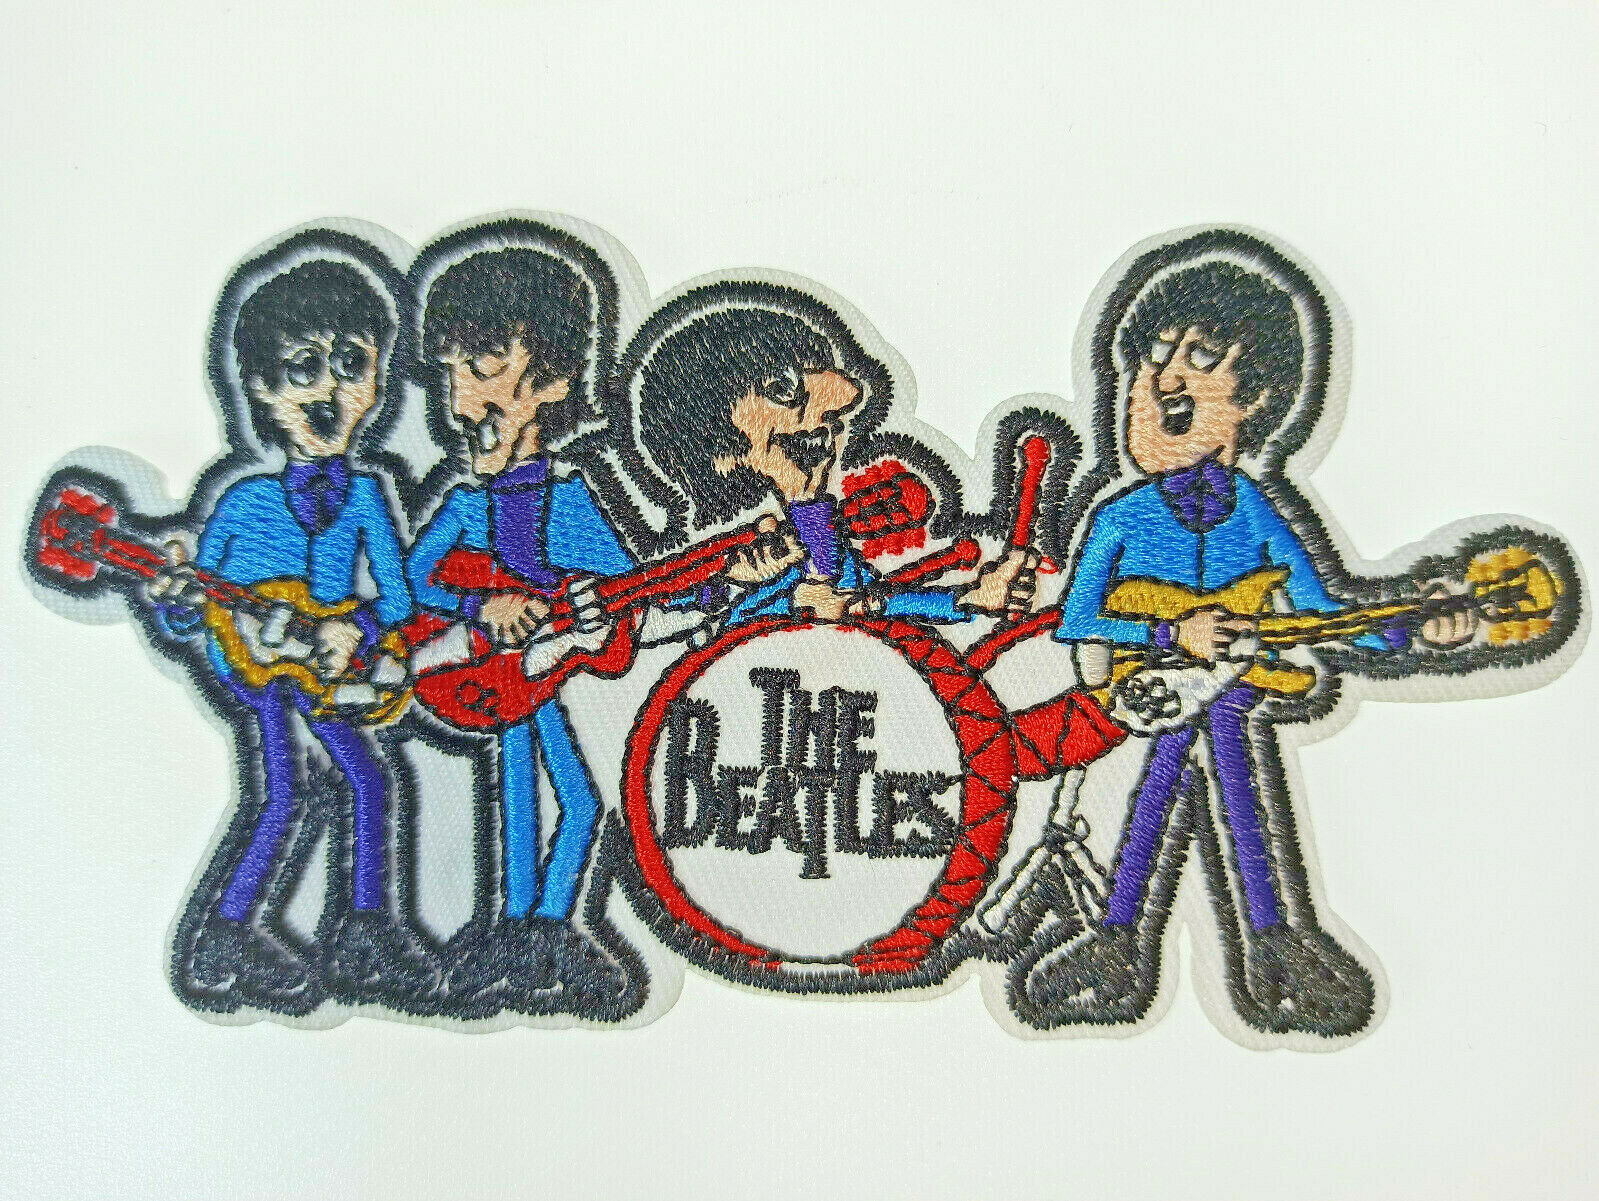 The BEATLES BAND Embroidered Cloth Patch Badge Iron Sew On Applique 5x2.5